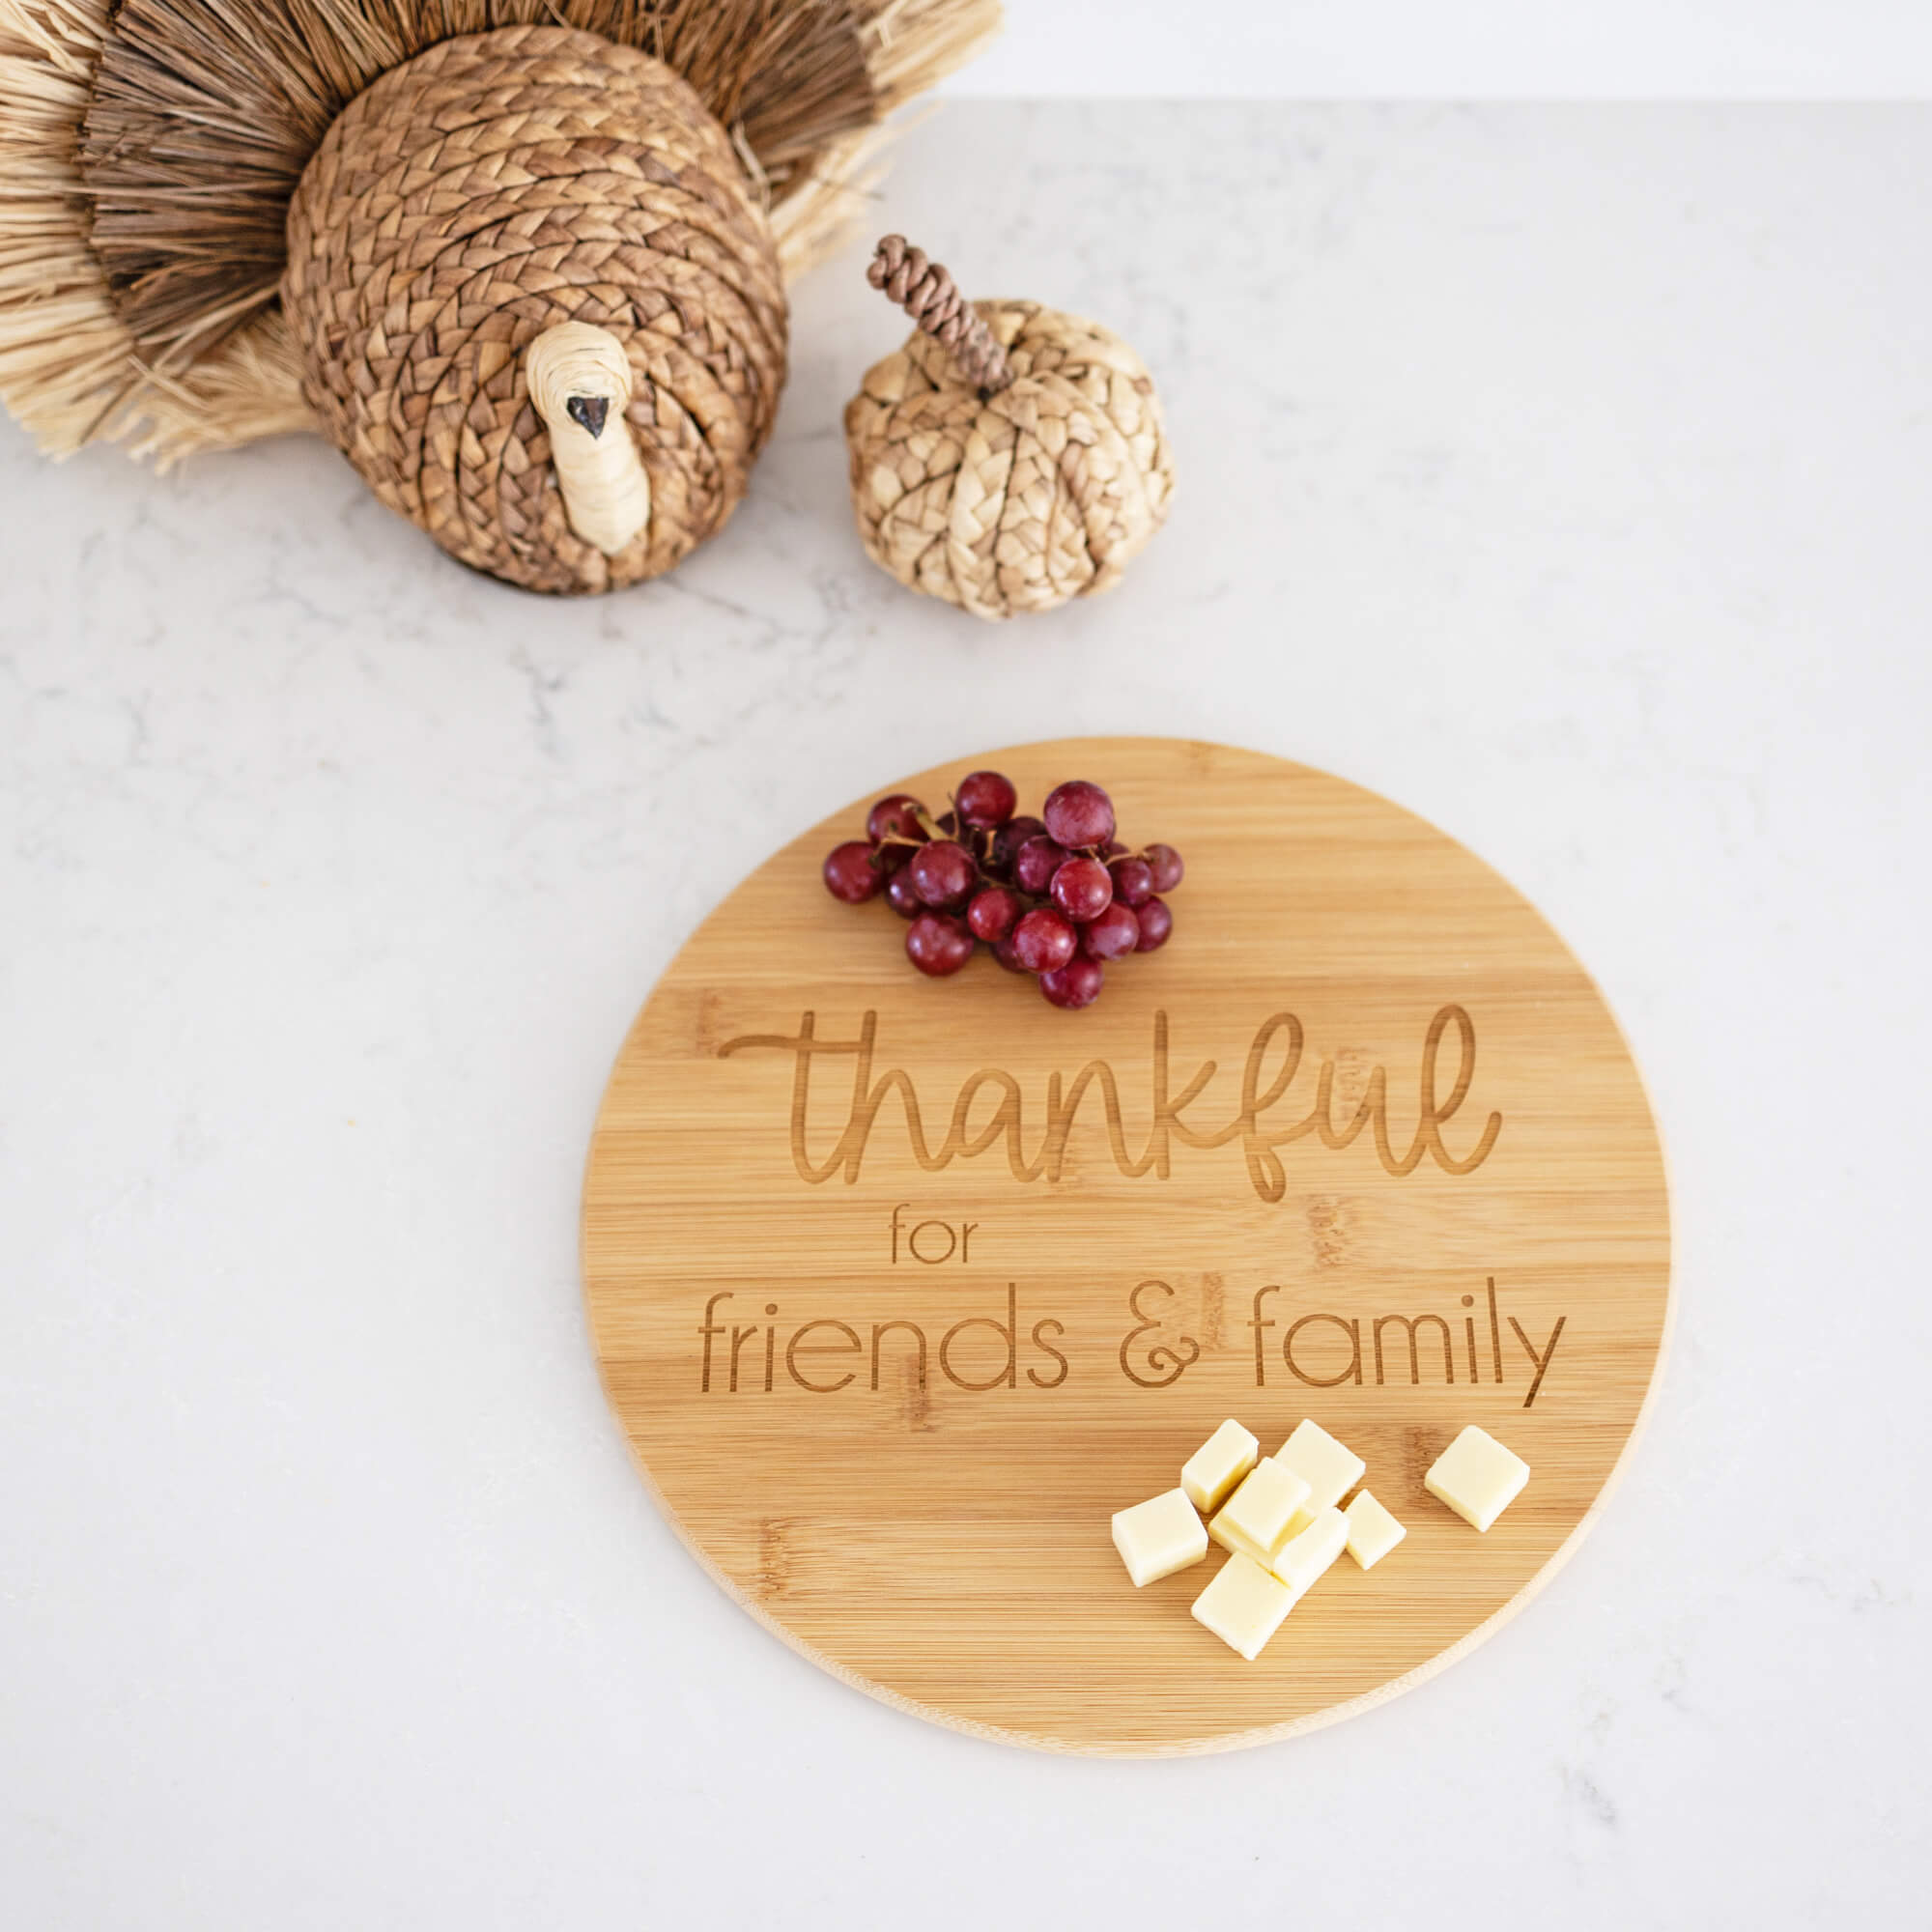 Thankful For Friends & Family - Round Bamboo Charcuterie Board